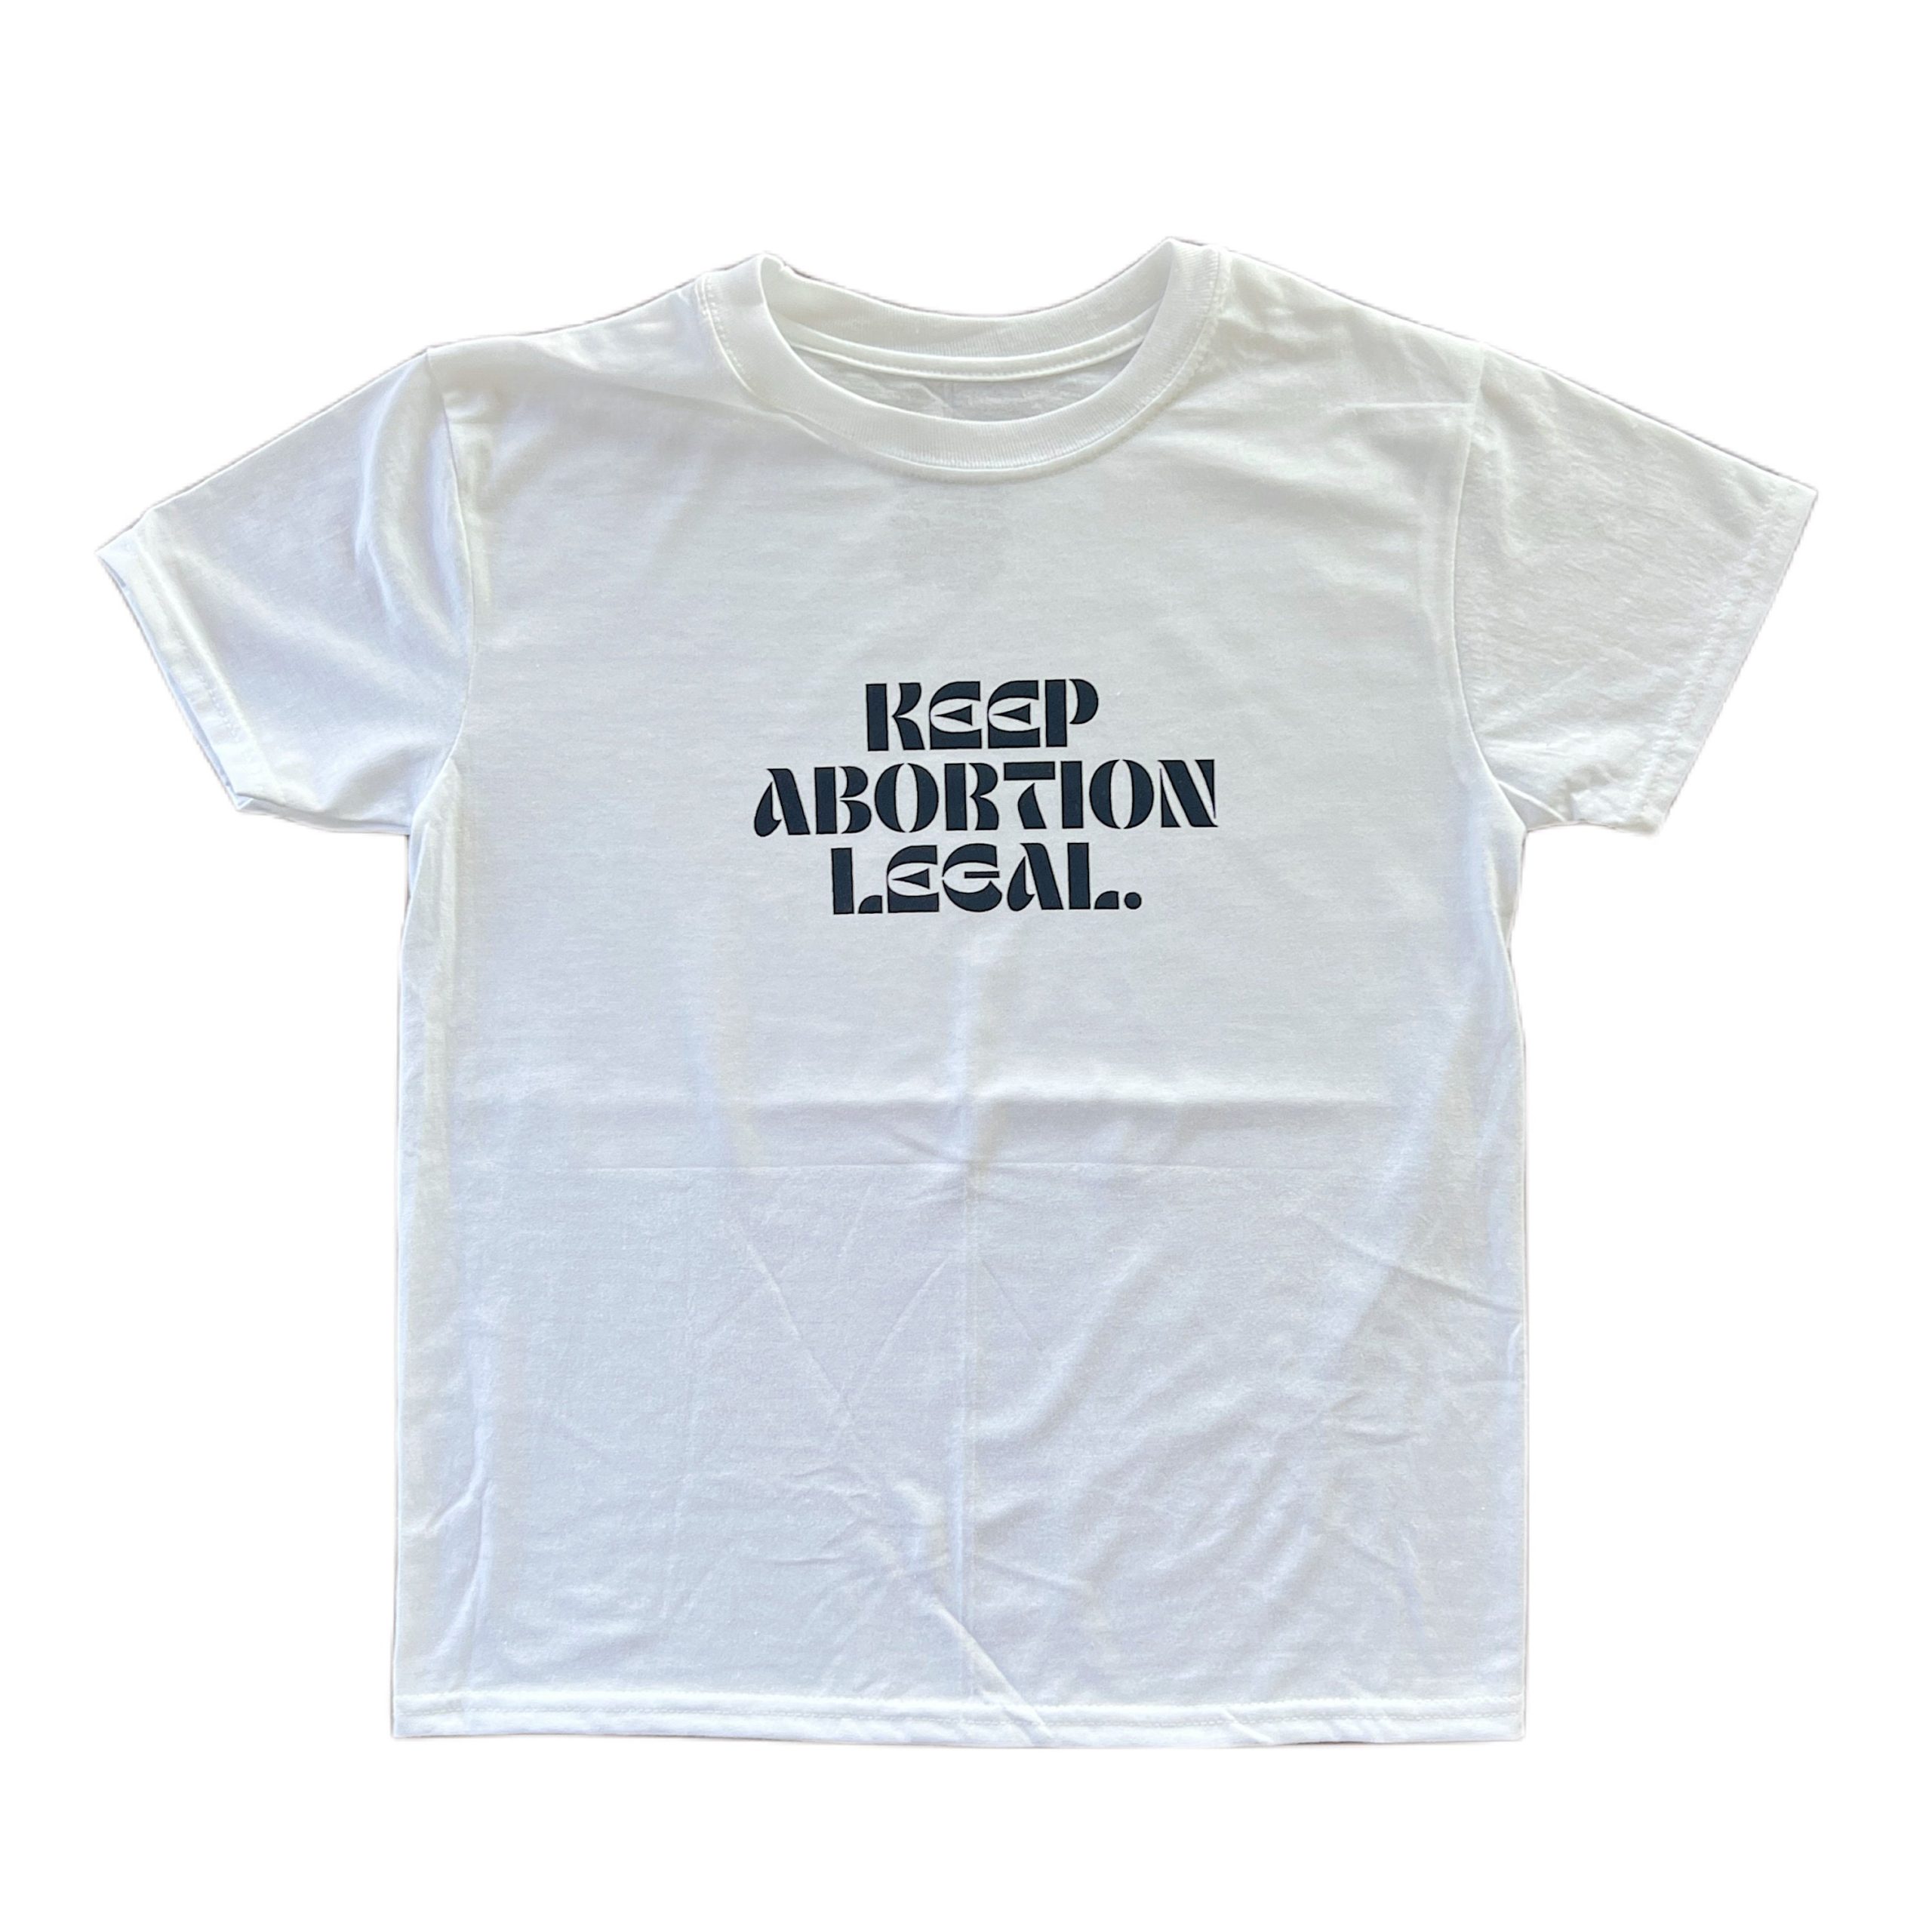 Vintage-inspired Keep Abortion Legal T-Shirt